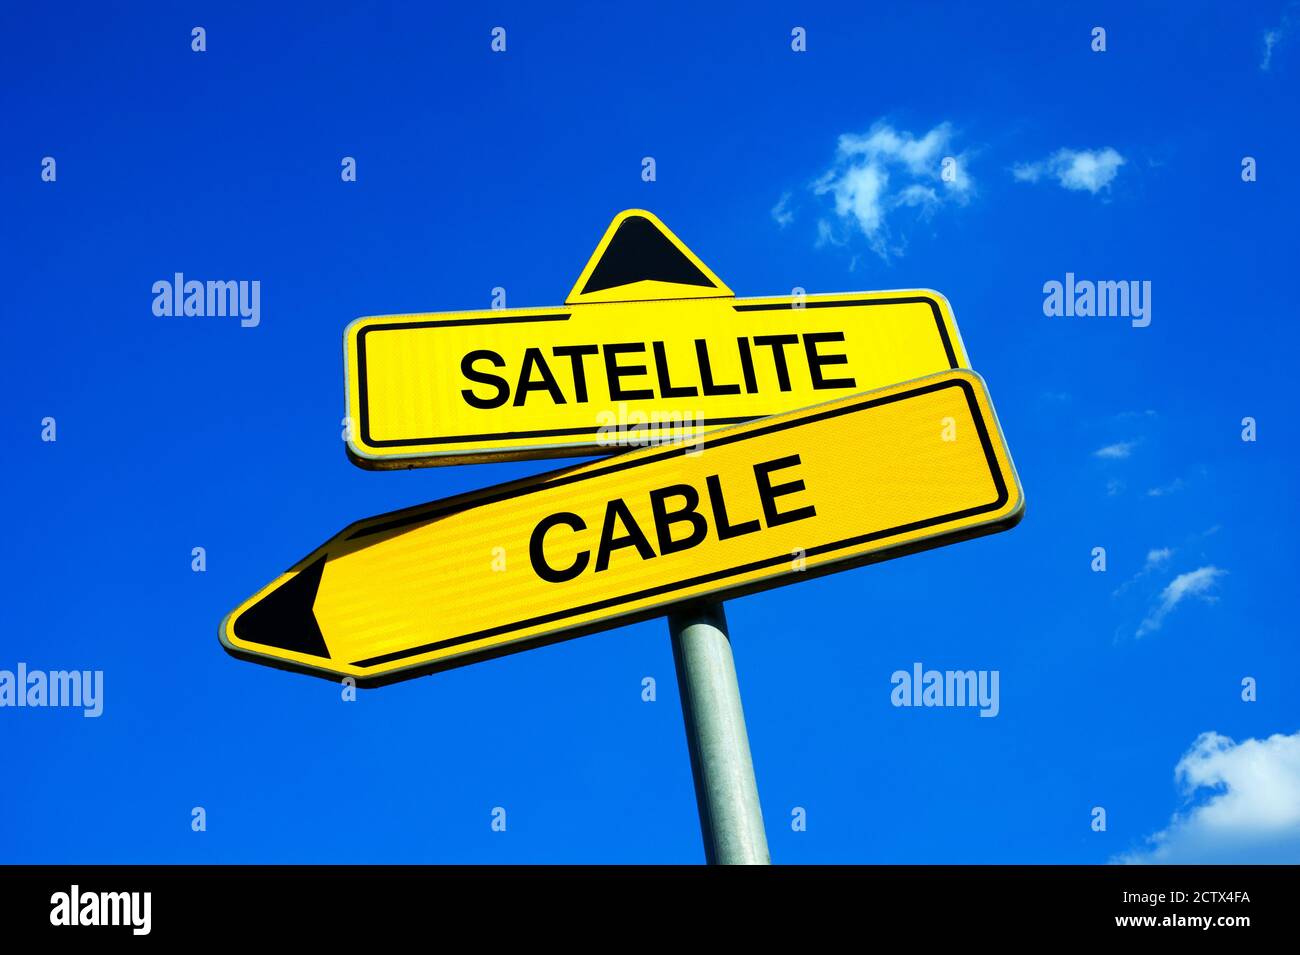 Satellite or Cable - Traffic sign with two options - decision between methods of receiving television signal. Question of distribution, provider, qual Stock Photo